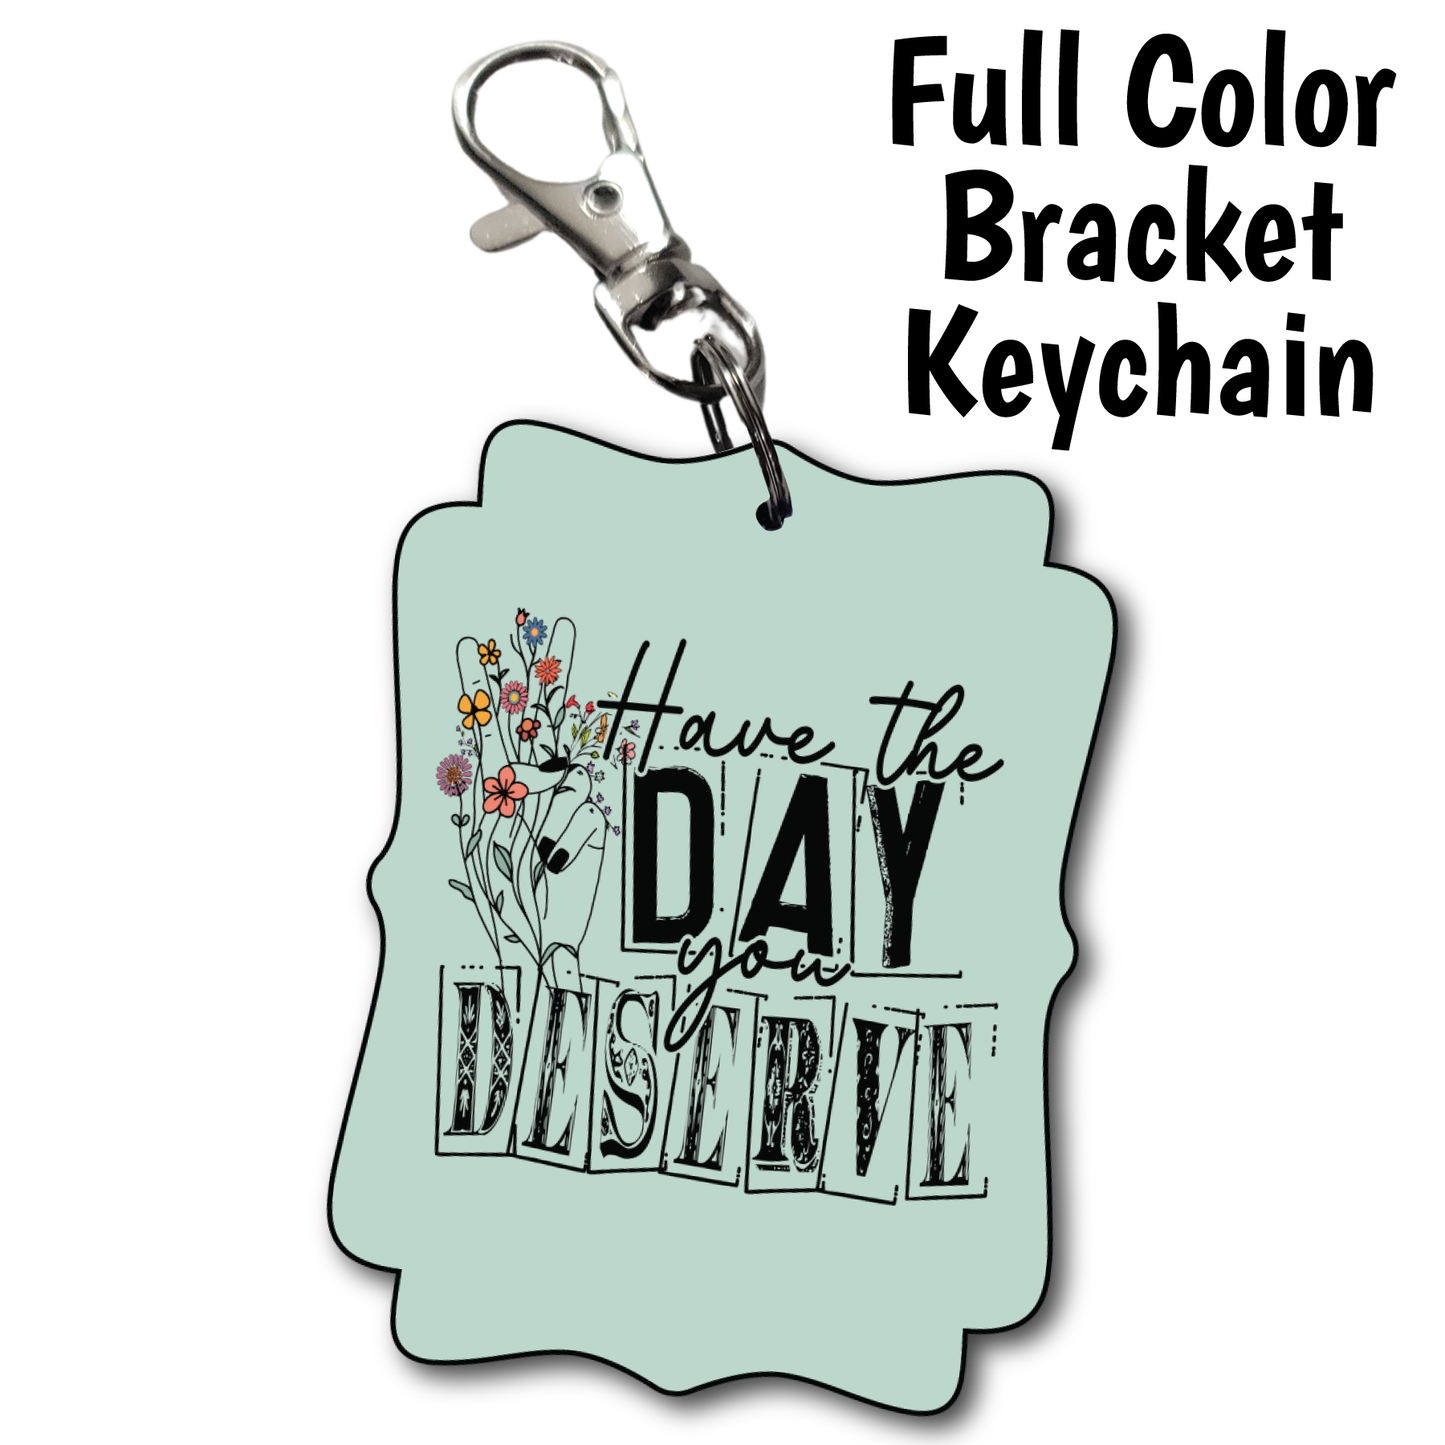 Day You Deserve - Full Color Keychains